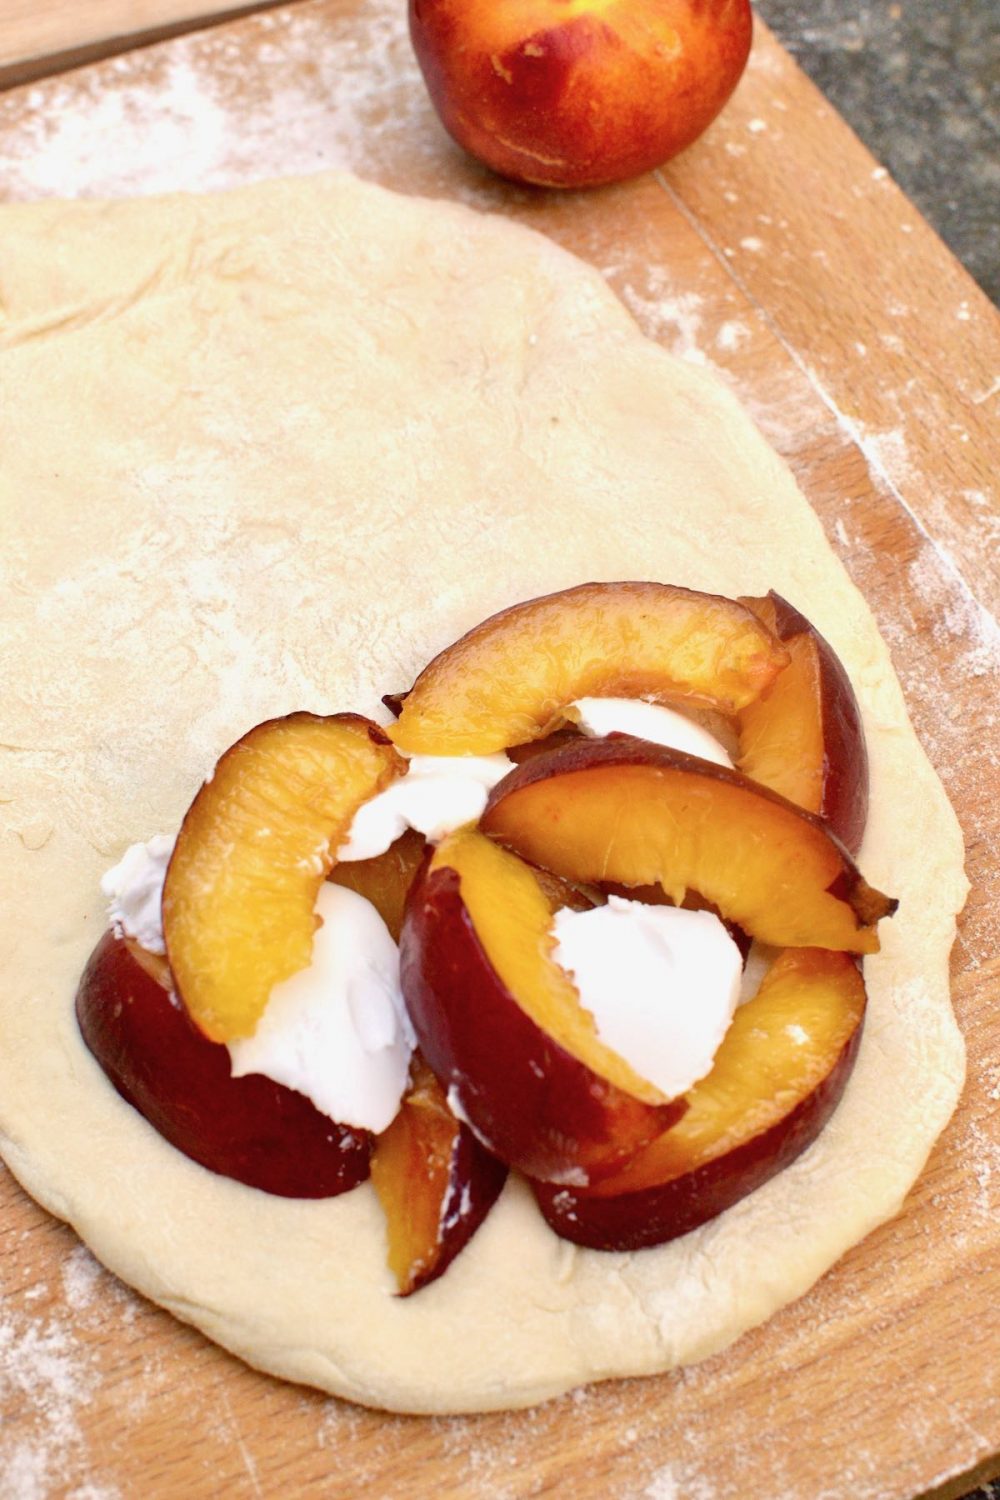 Fresh peach slices and coconut cream are used as a filling for a piece of dough.